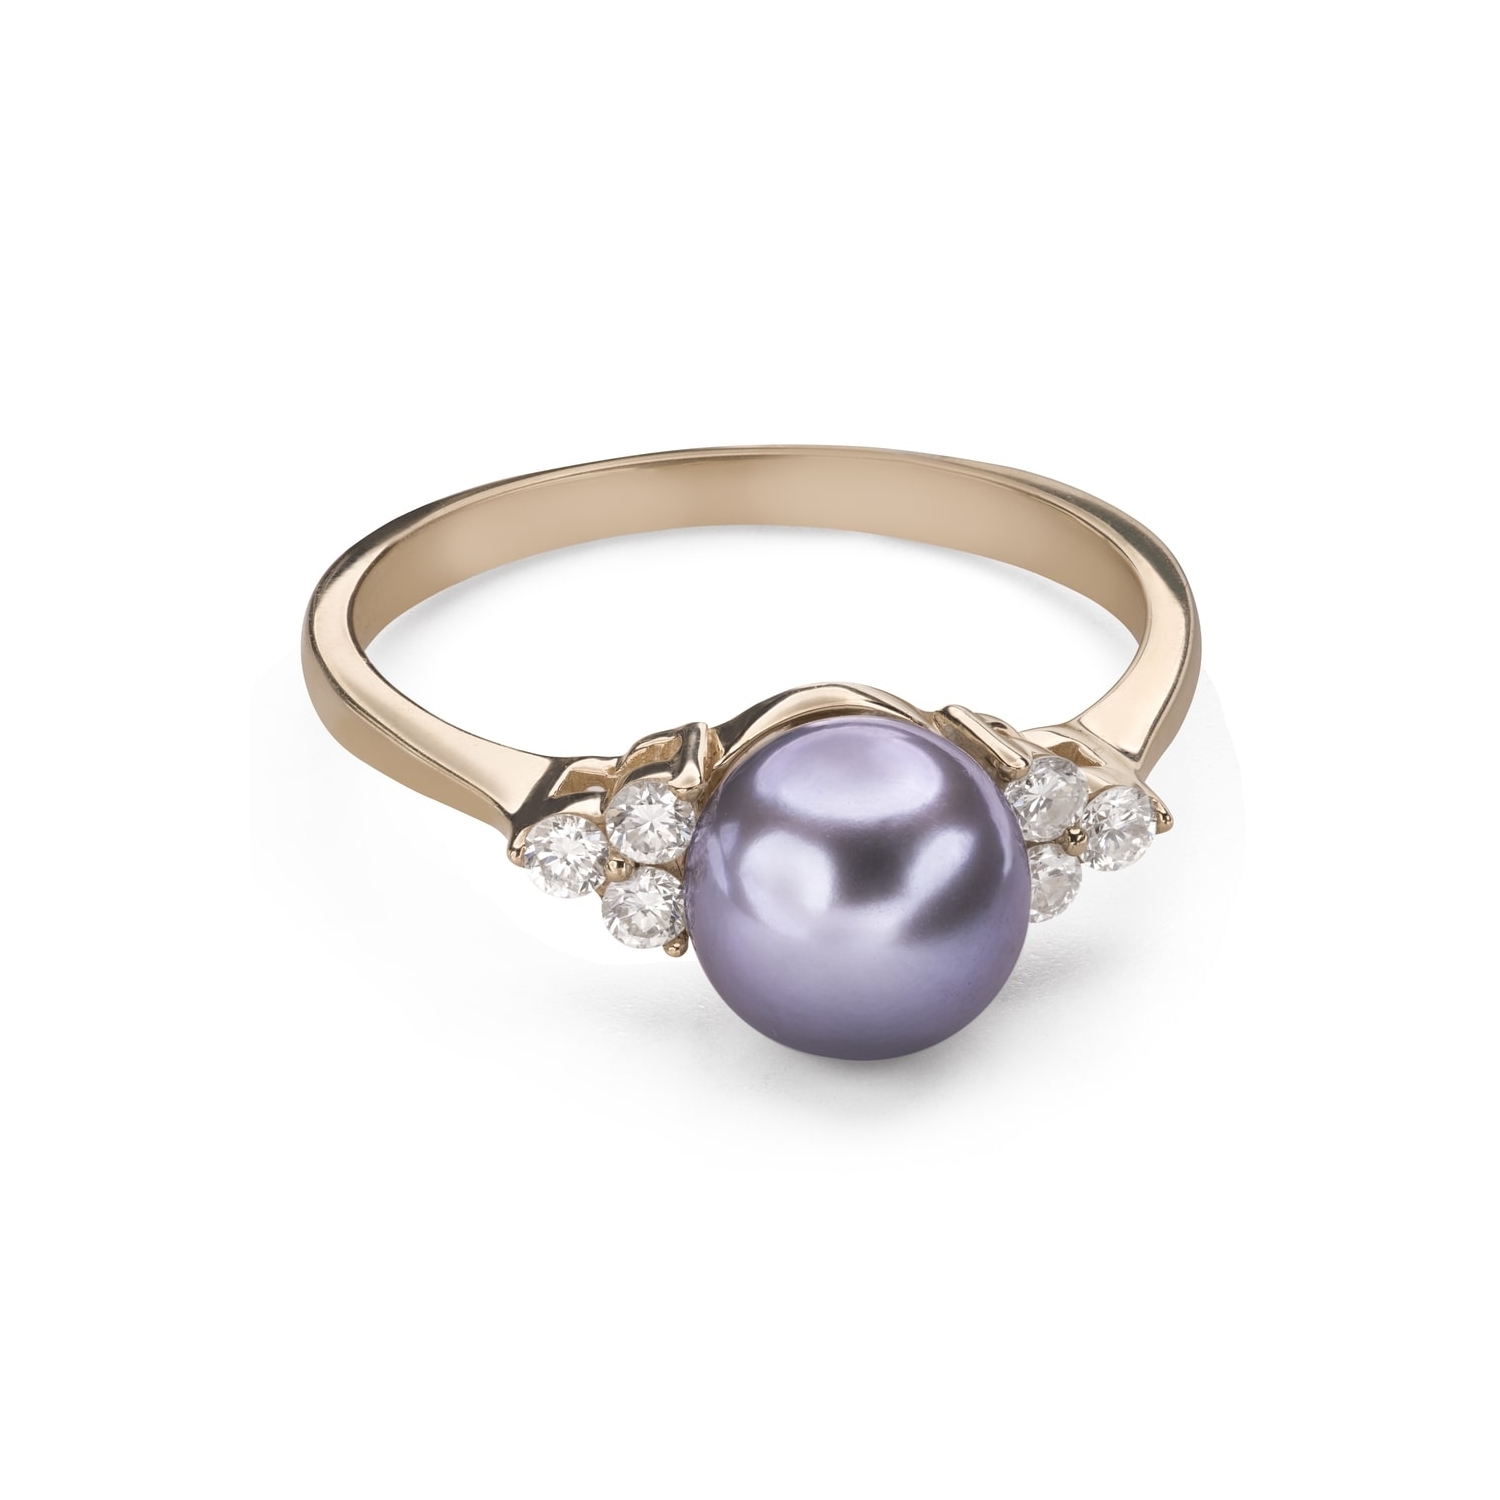 Engagement ring with gemstones "Pearl 9"